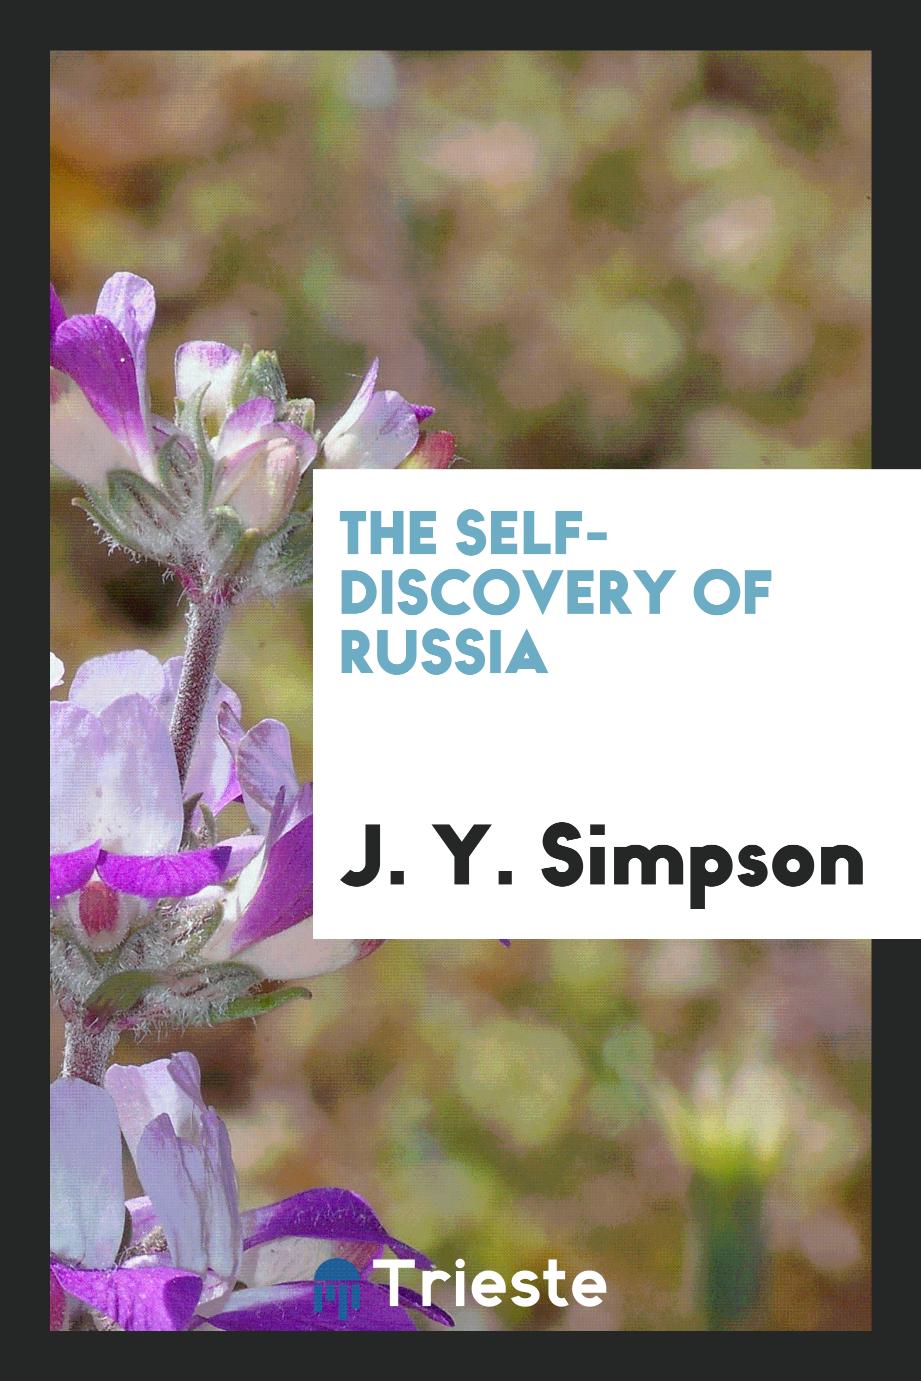 The self-discovery of Russia